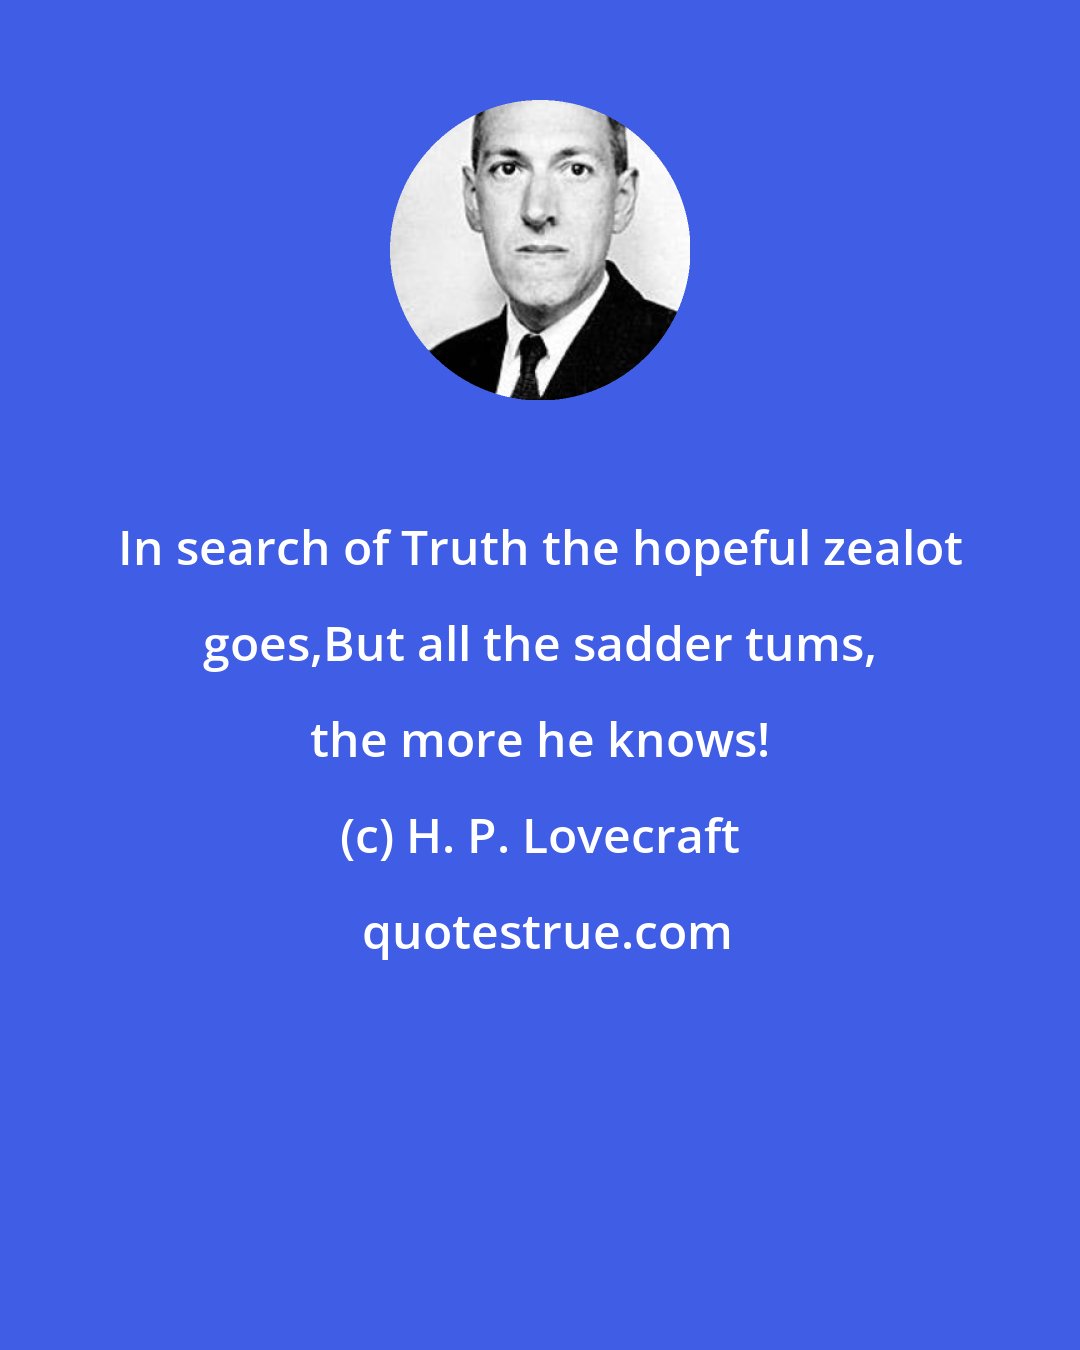 H. P. Lovecraft: In search of Truth the hopeful zealot goes,But all the sadder tums, the more he knows!